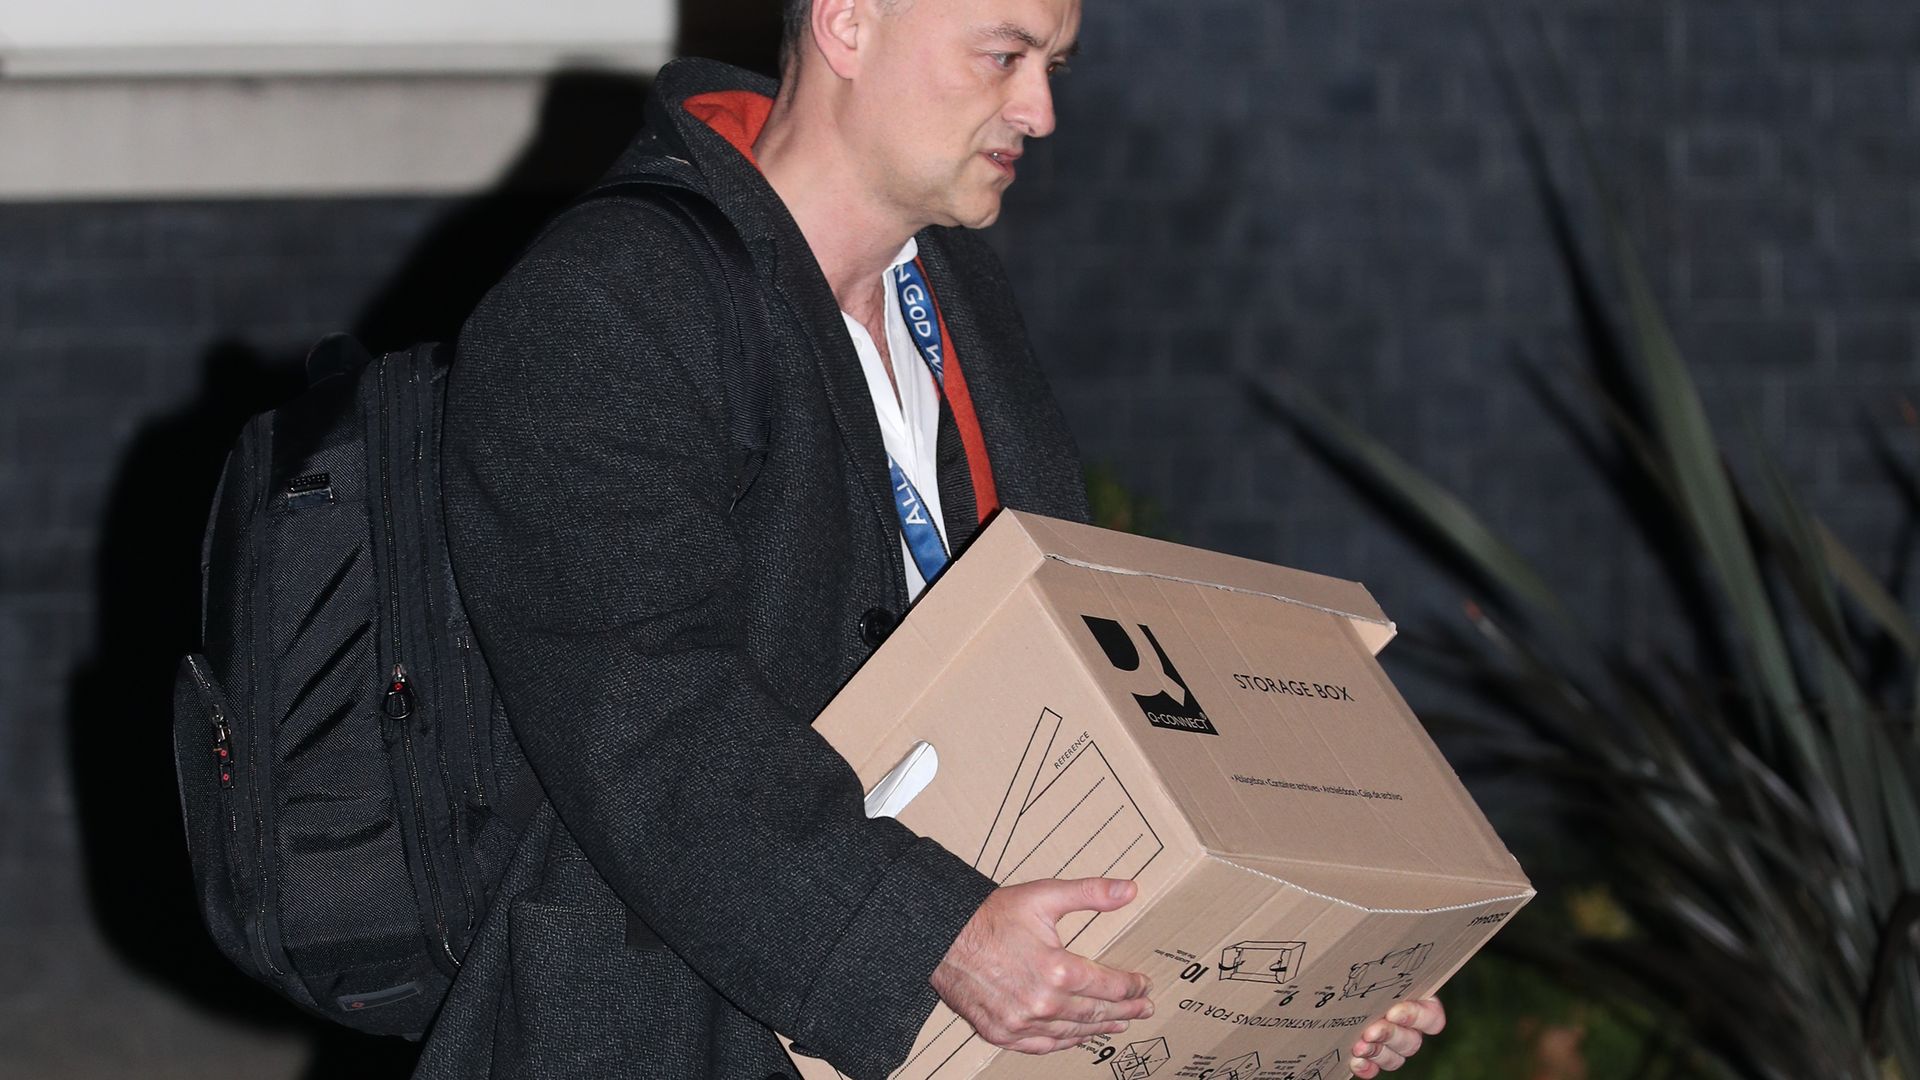 Prime Minister Boris Johnson's top aide Dominic Cummings leaves 10 Downing Street - Credit: PA